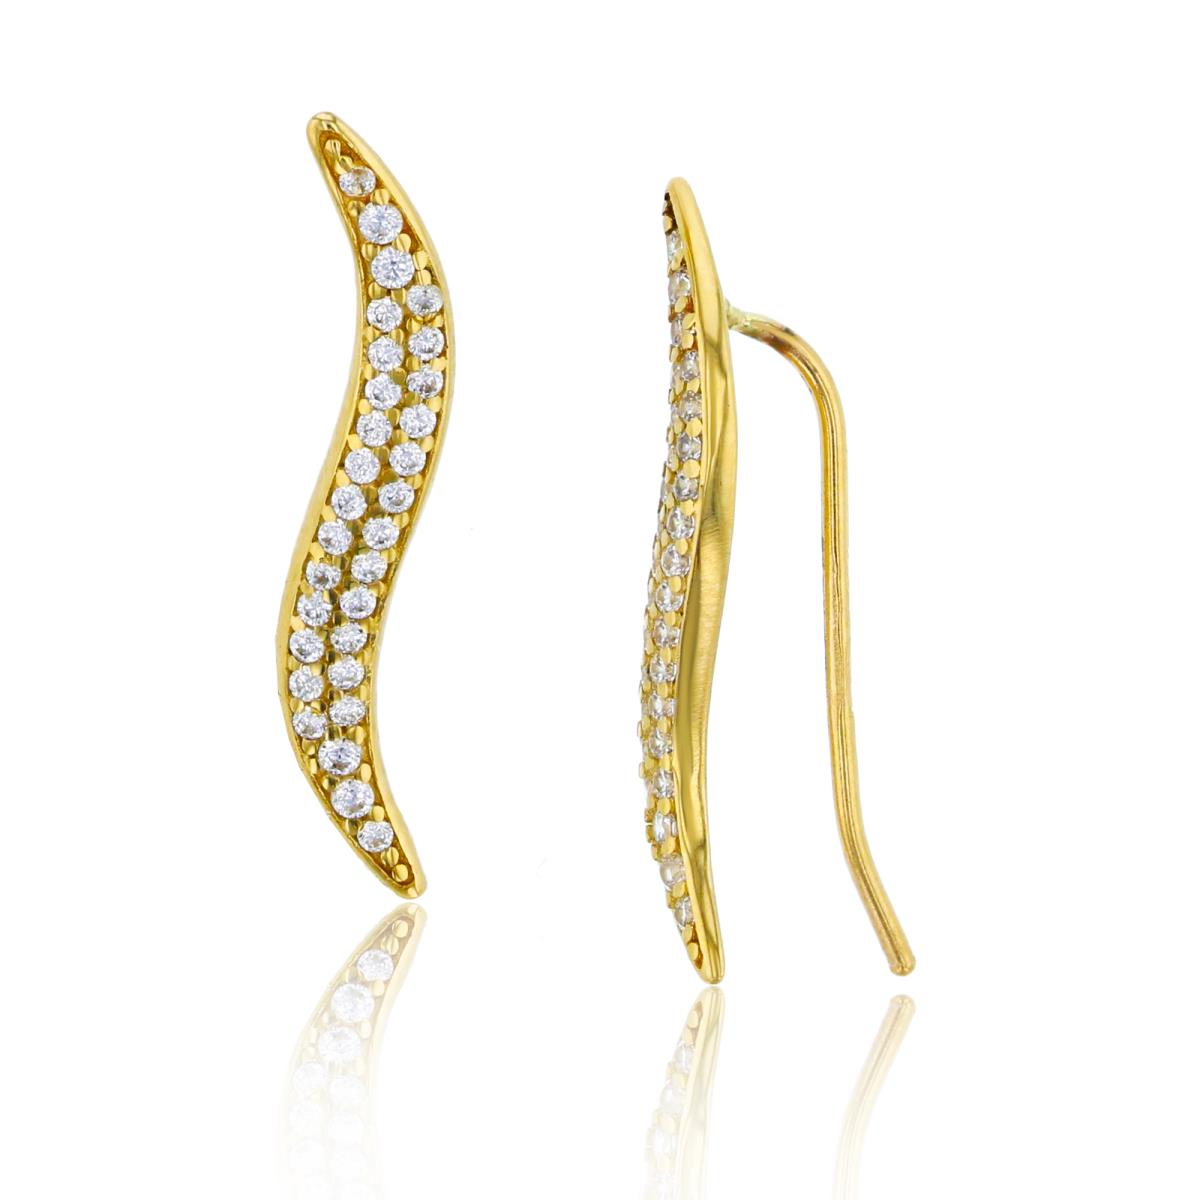 10K Yellow Gold 22x4mm Pave "S" Shaped Ear Crawler